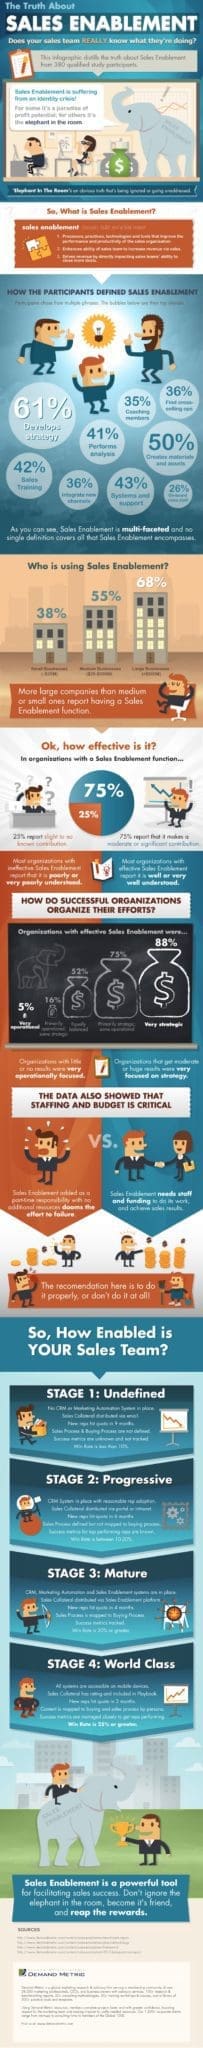 Sales-Enablement-Infographic.jpg